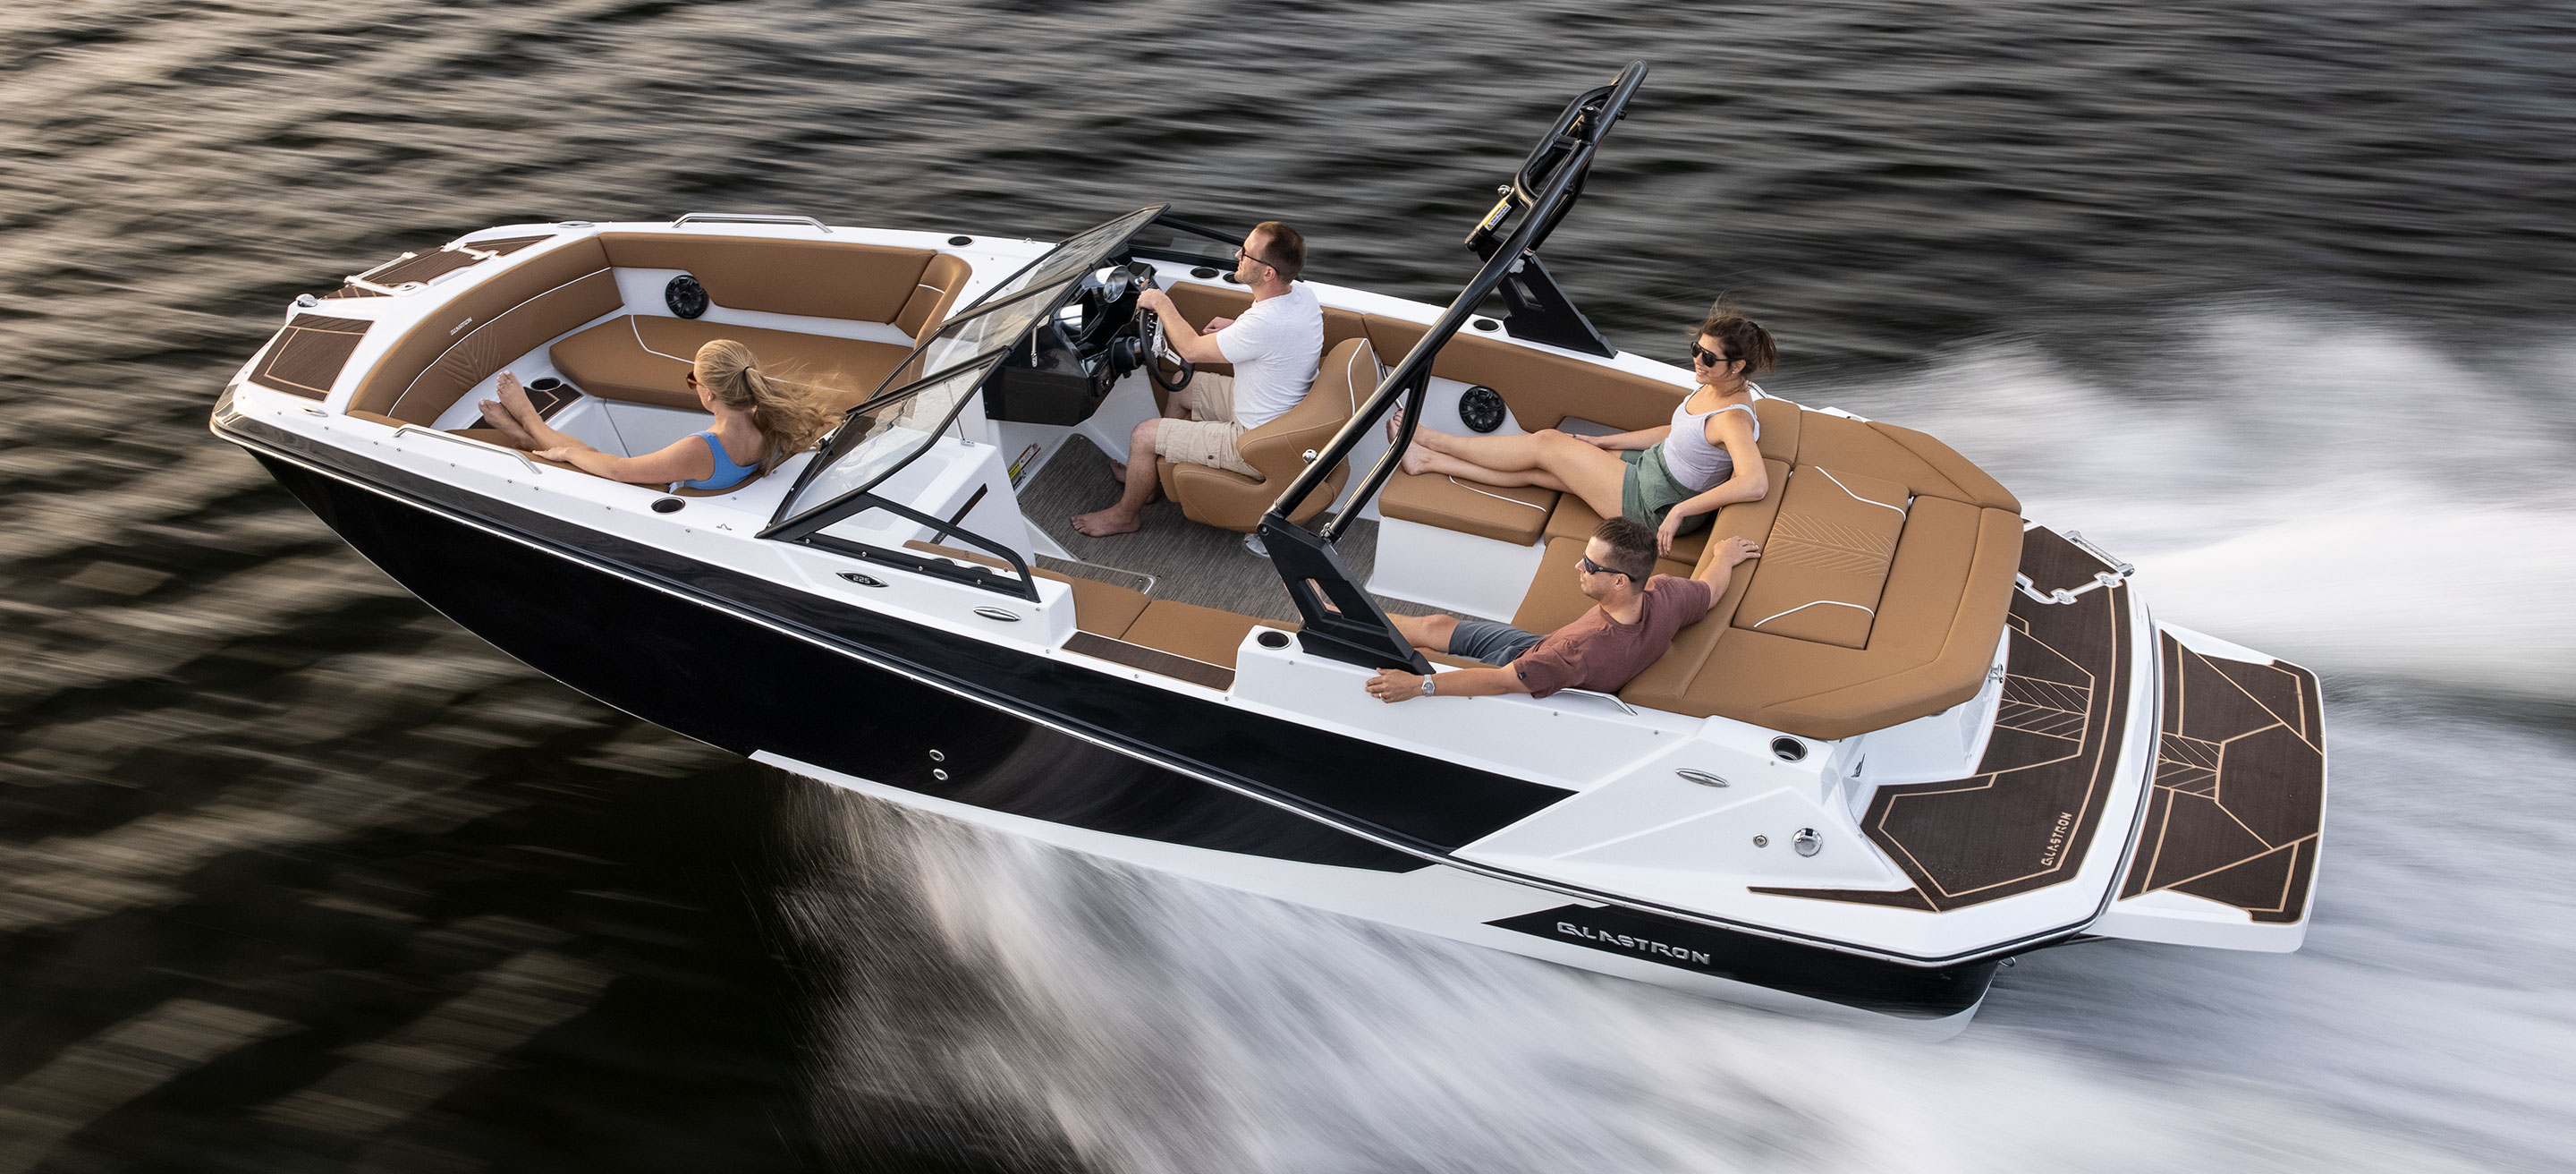 10 Boating Basics Every Boat Owner Should Know